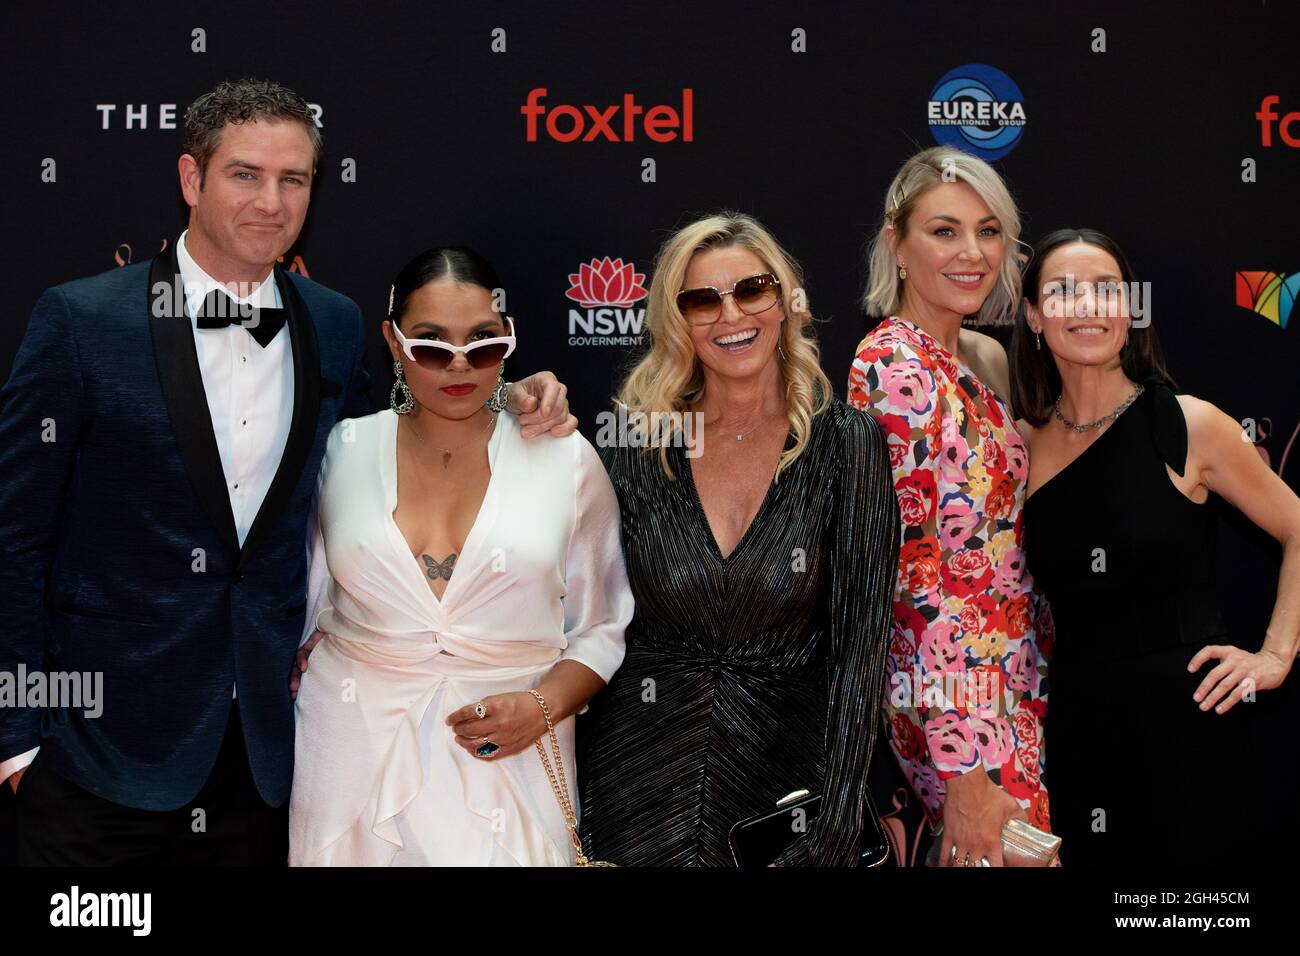 Sydney, Australia, 4 December, 2019. Bernard Curry, Rarriwuy Hick, Tammy MacIntosh, Kate Jenkinson and Kate Atkinsson arrives for the 2019 AACTA Awards Presented by Foxtel at The Star on December 04, 2019 in Sydney, Australia. Credit: Speed Media/Alamy Live News Stock Photo